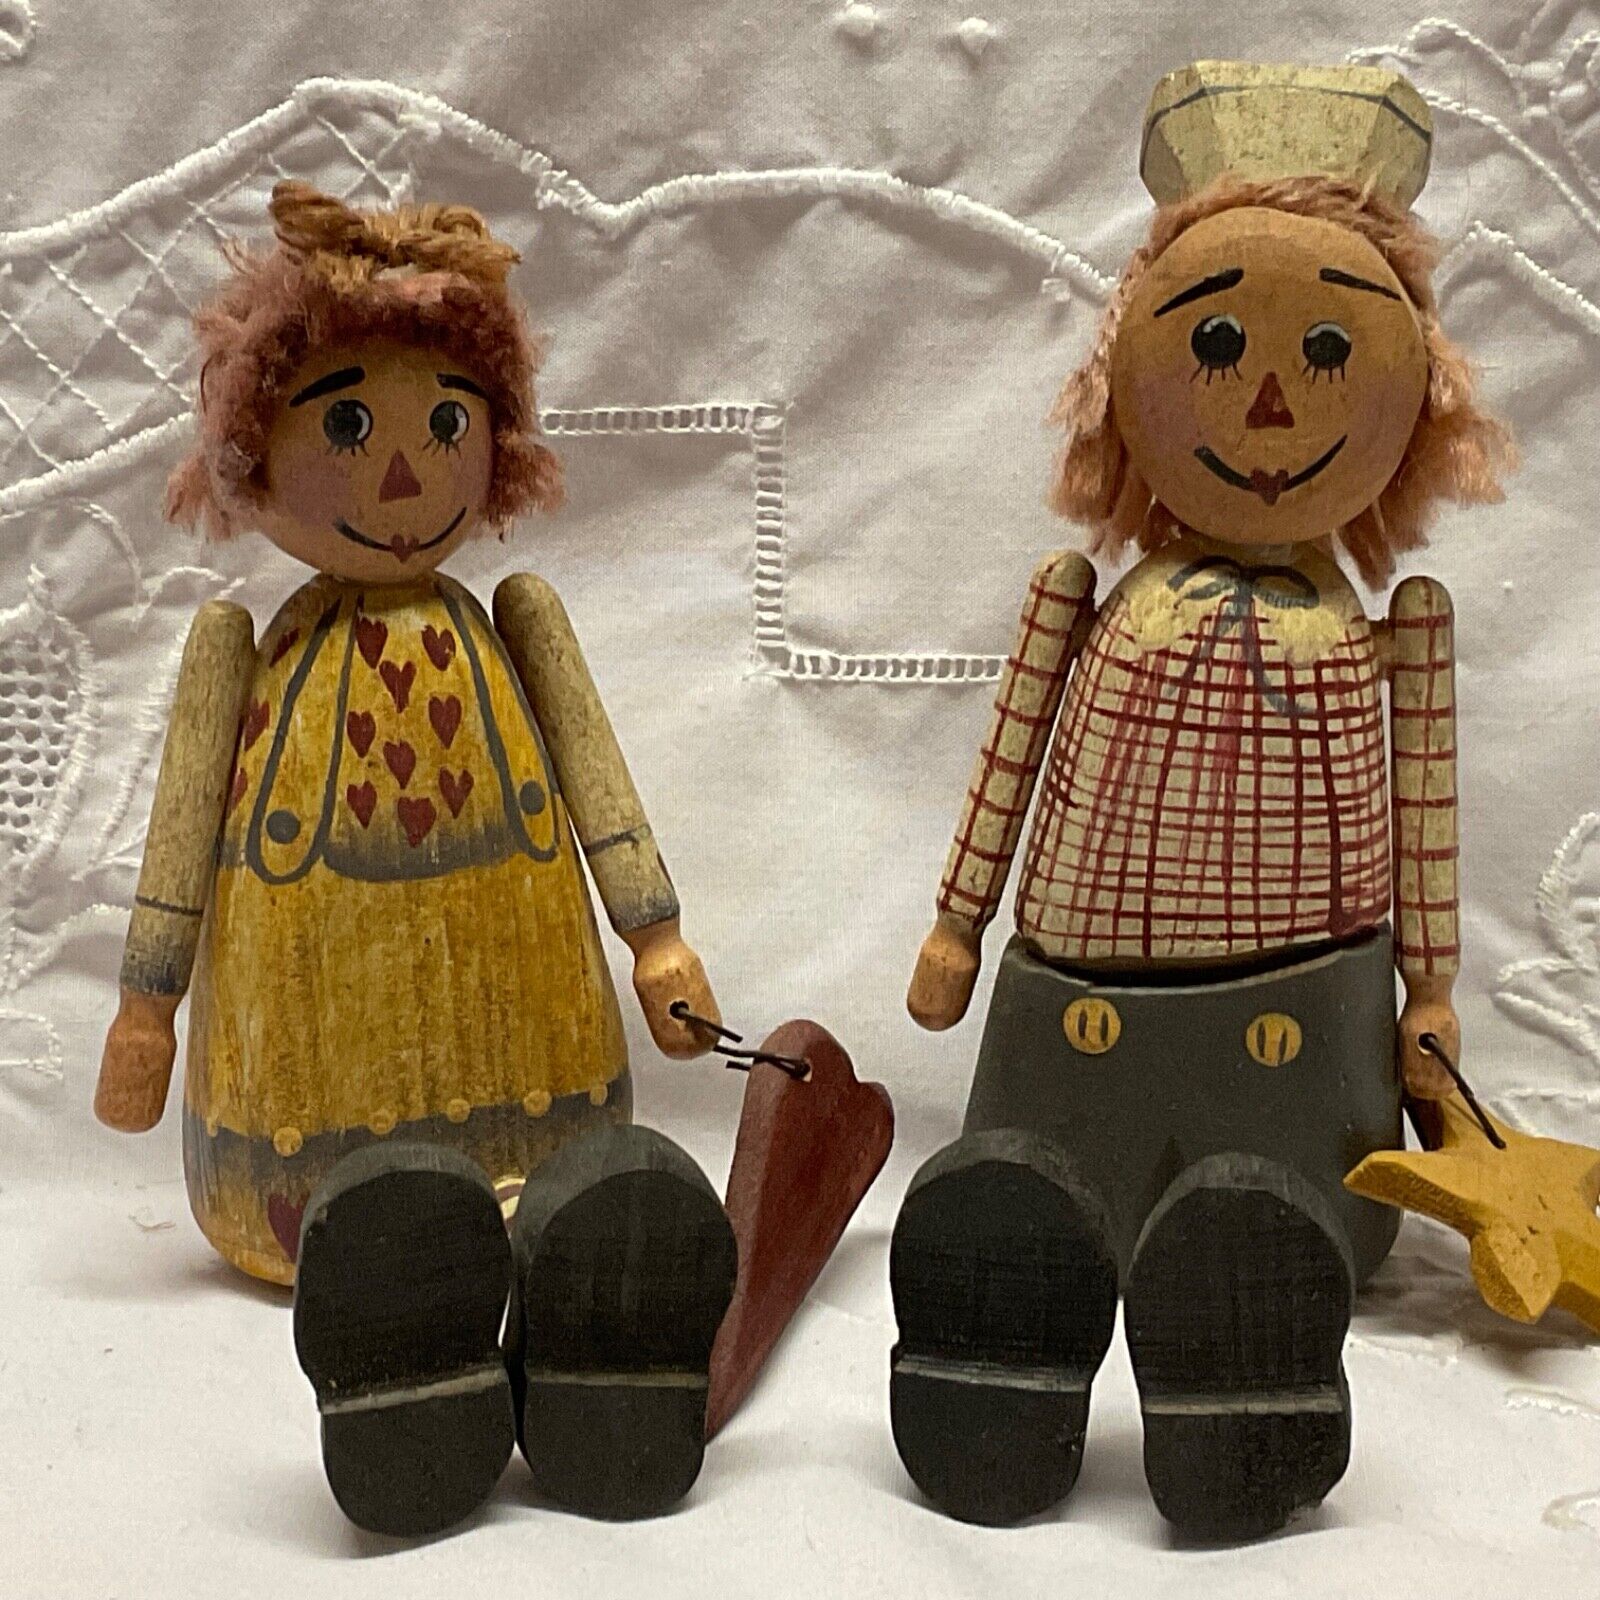 PRIMITIVE FOLK ART “ANN & ANDY” WOOD CARVED HAND PAINTED FIGURINES